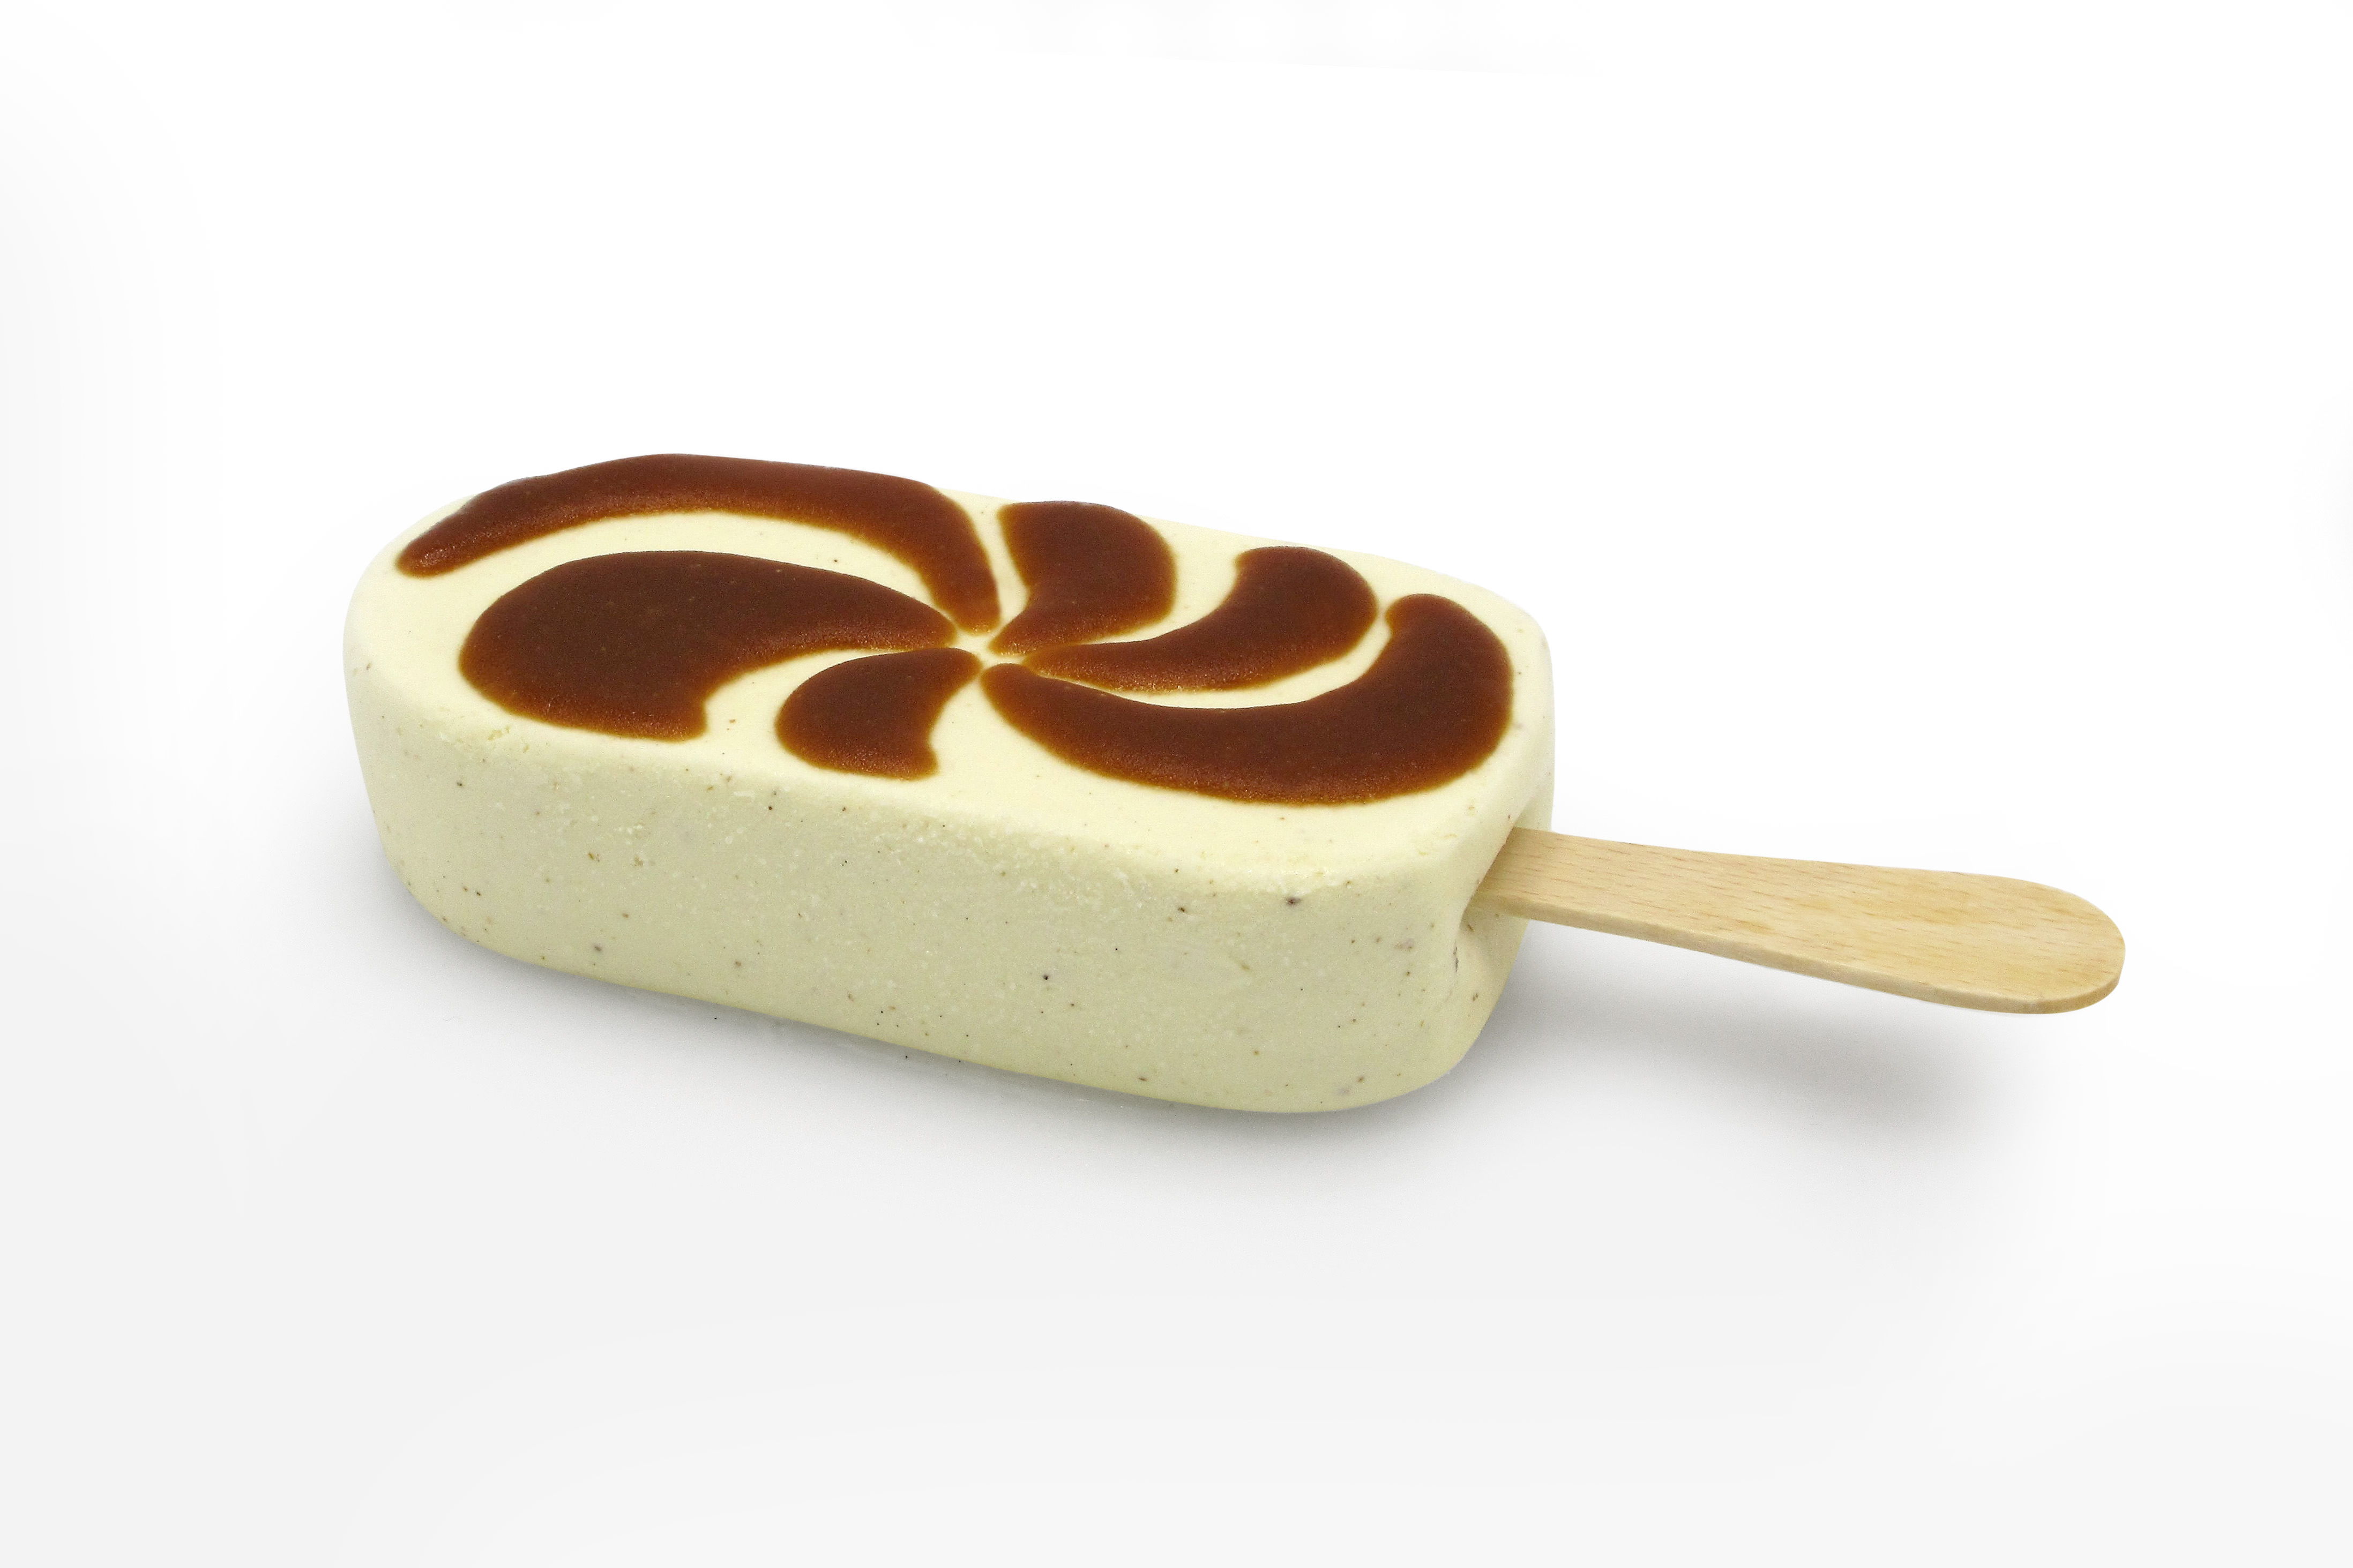 Magnum-type ice cream surface filled with a caramel pattern by a FoodJet food depositor